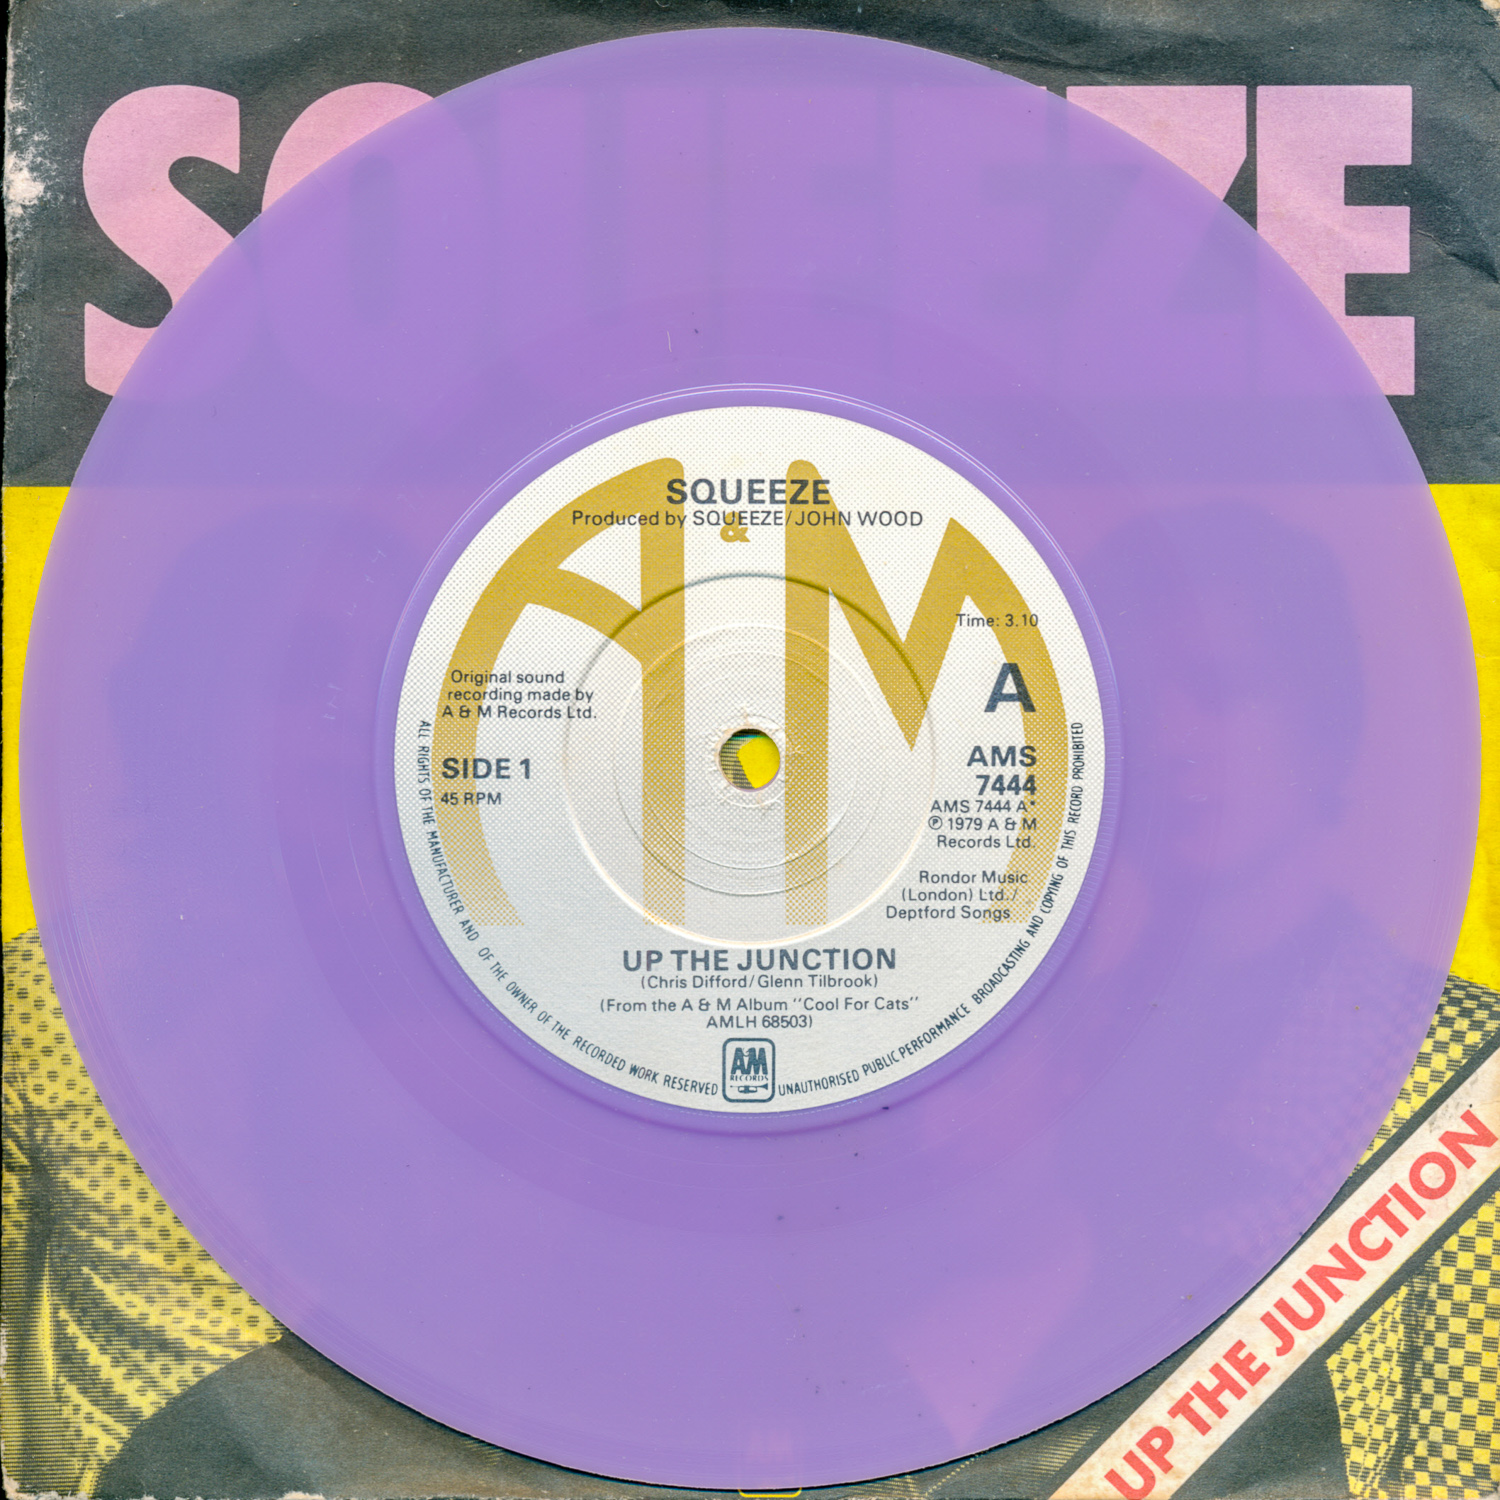 Up the Junction - brown label lilac vinyl